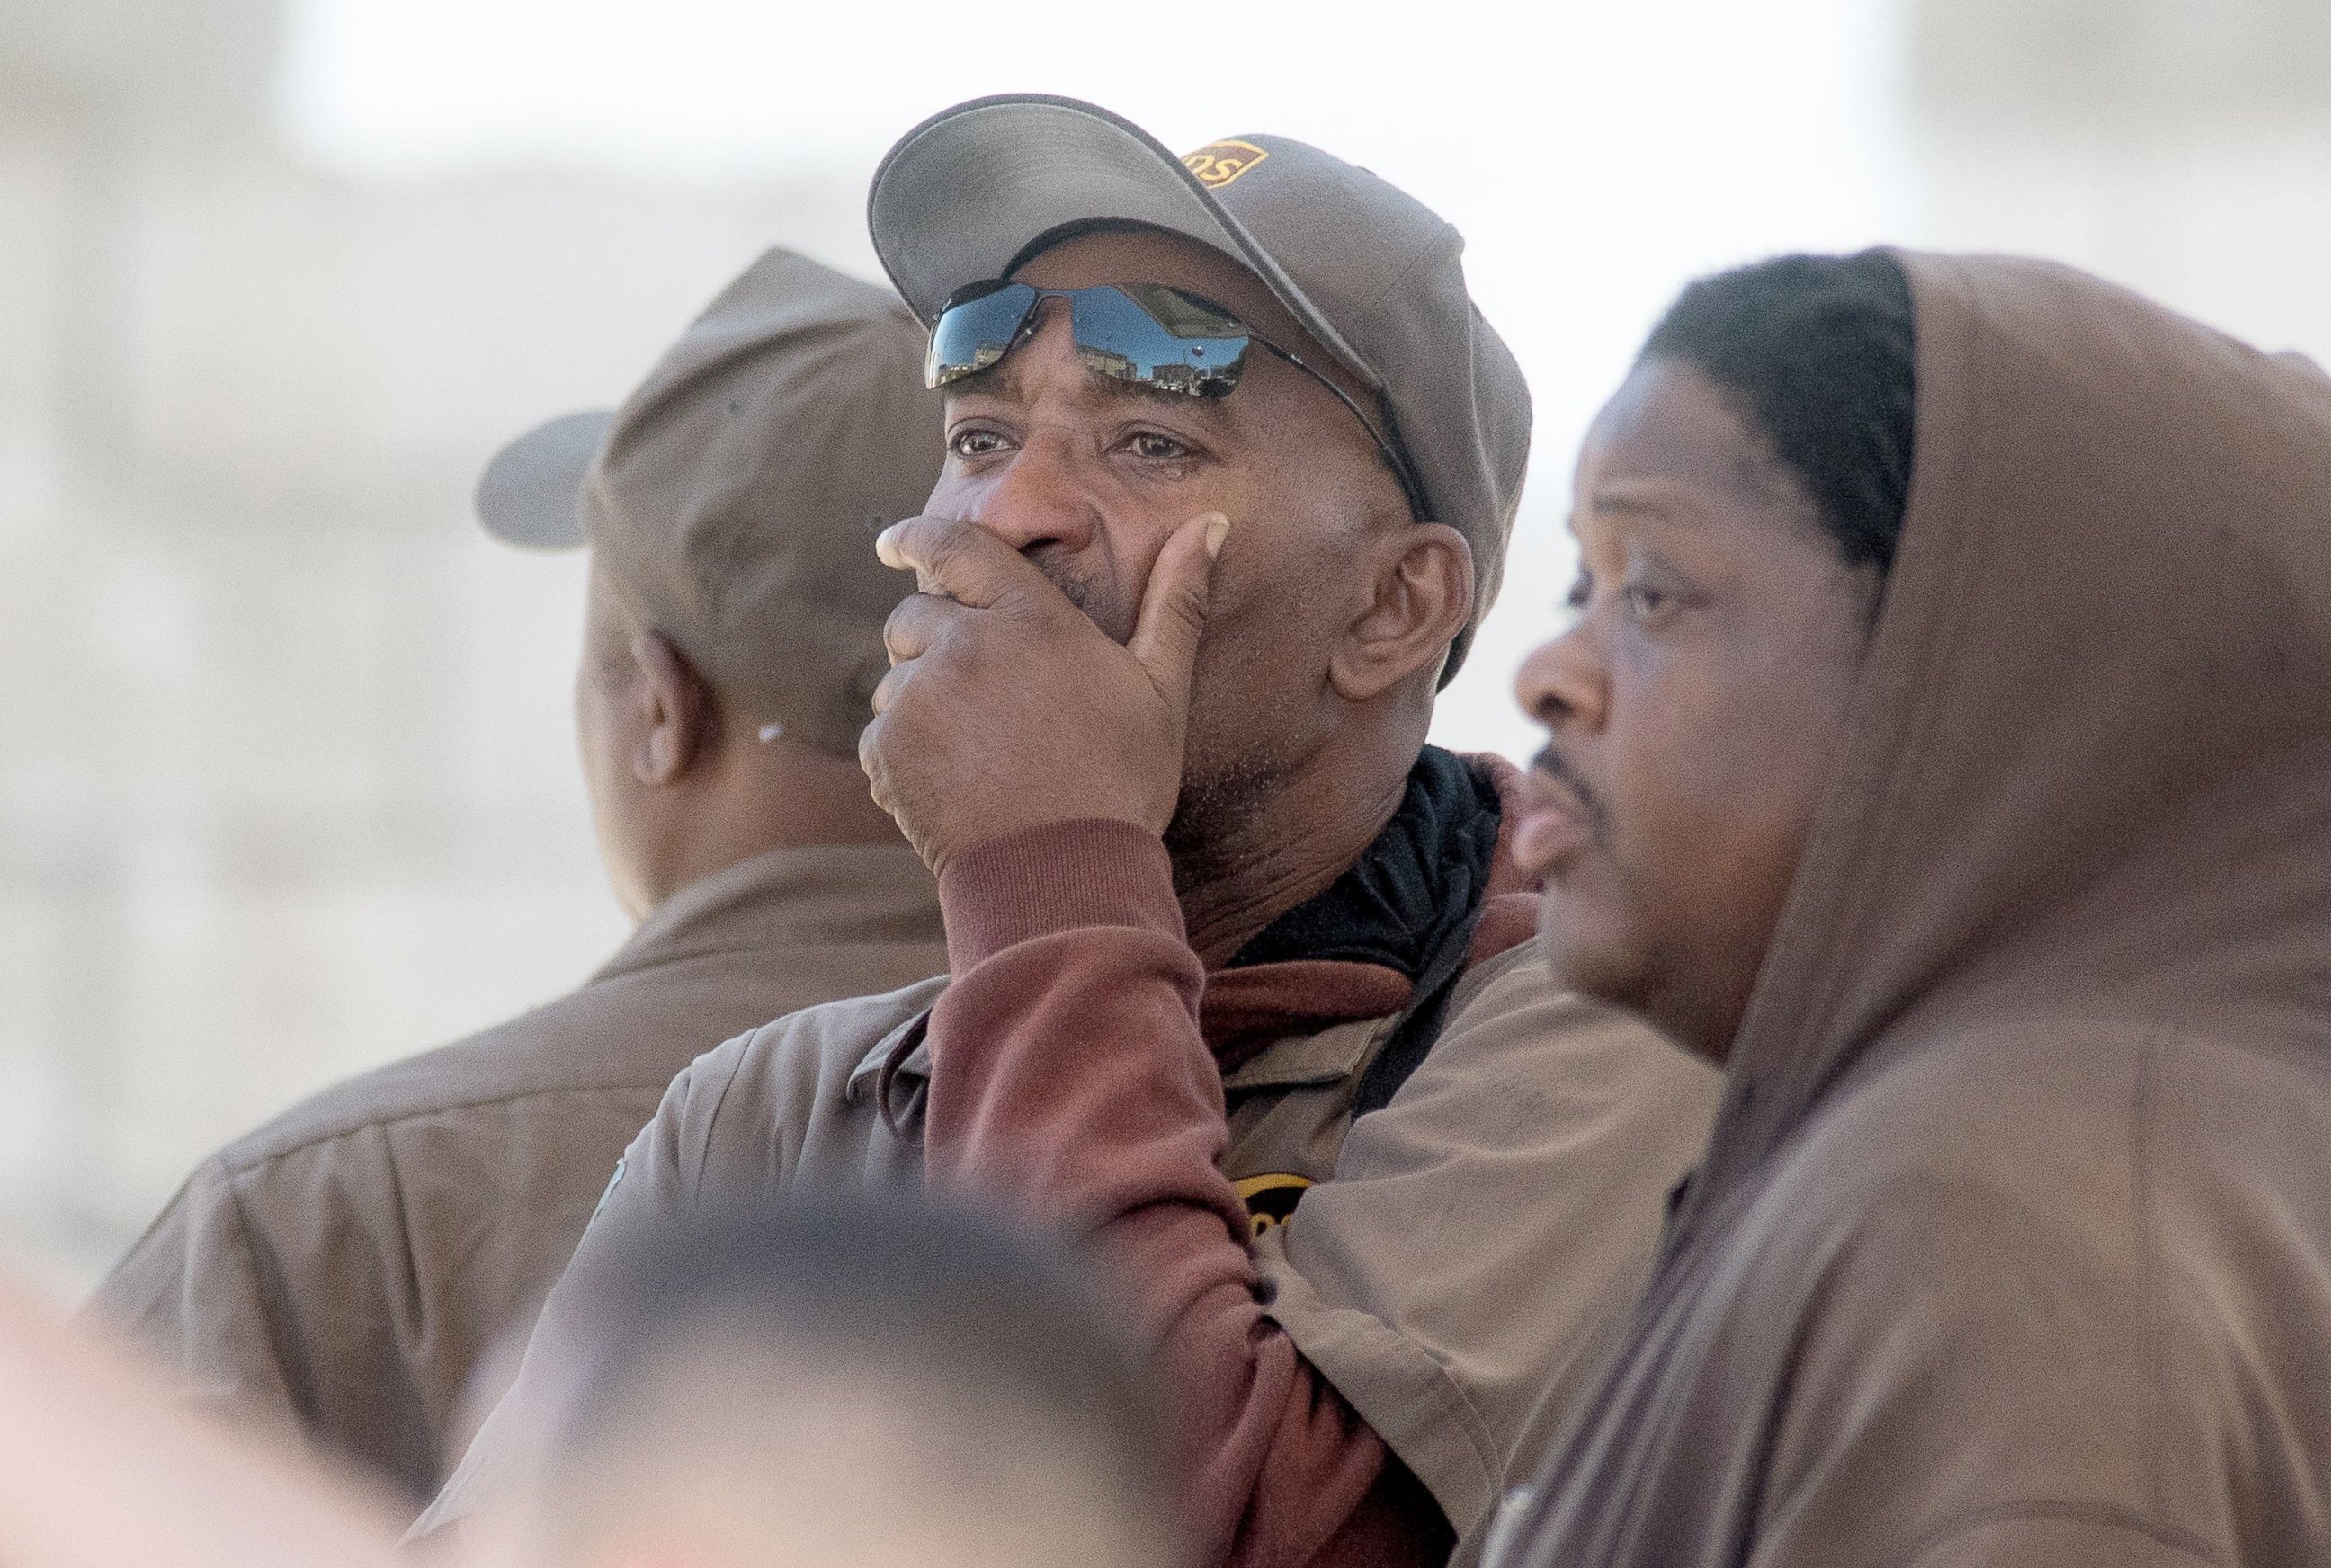 PHOTO: UPS workers react at the scene where a gunman shot and killed multiple people including himself at a UPS facility in San Francisco, California, June 14, 2017.